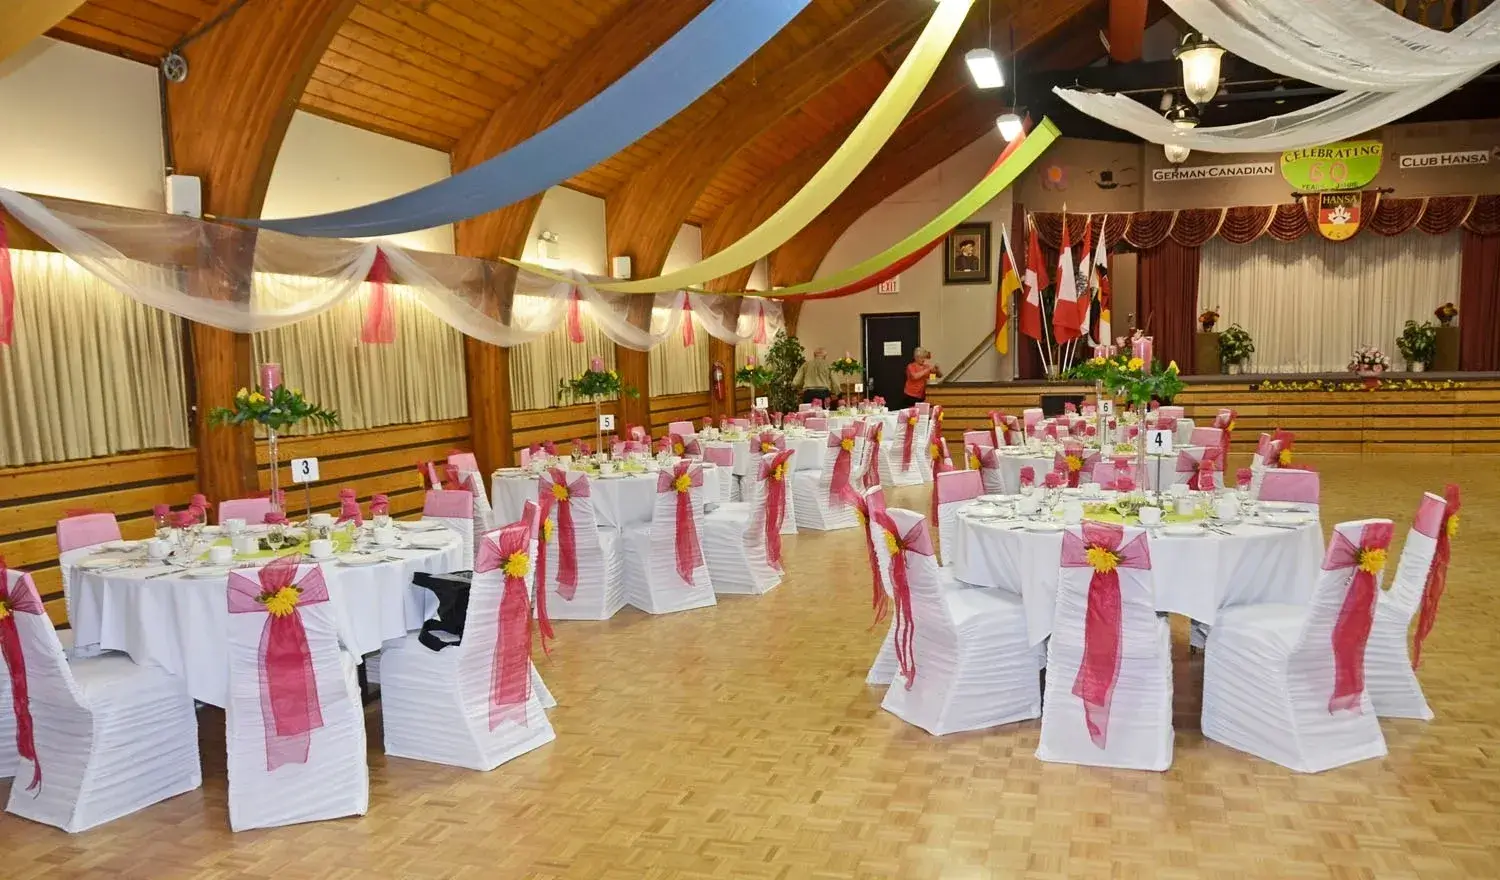 A banquet hall with many tables and chairs